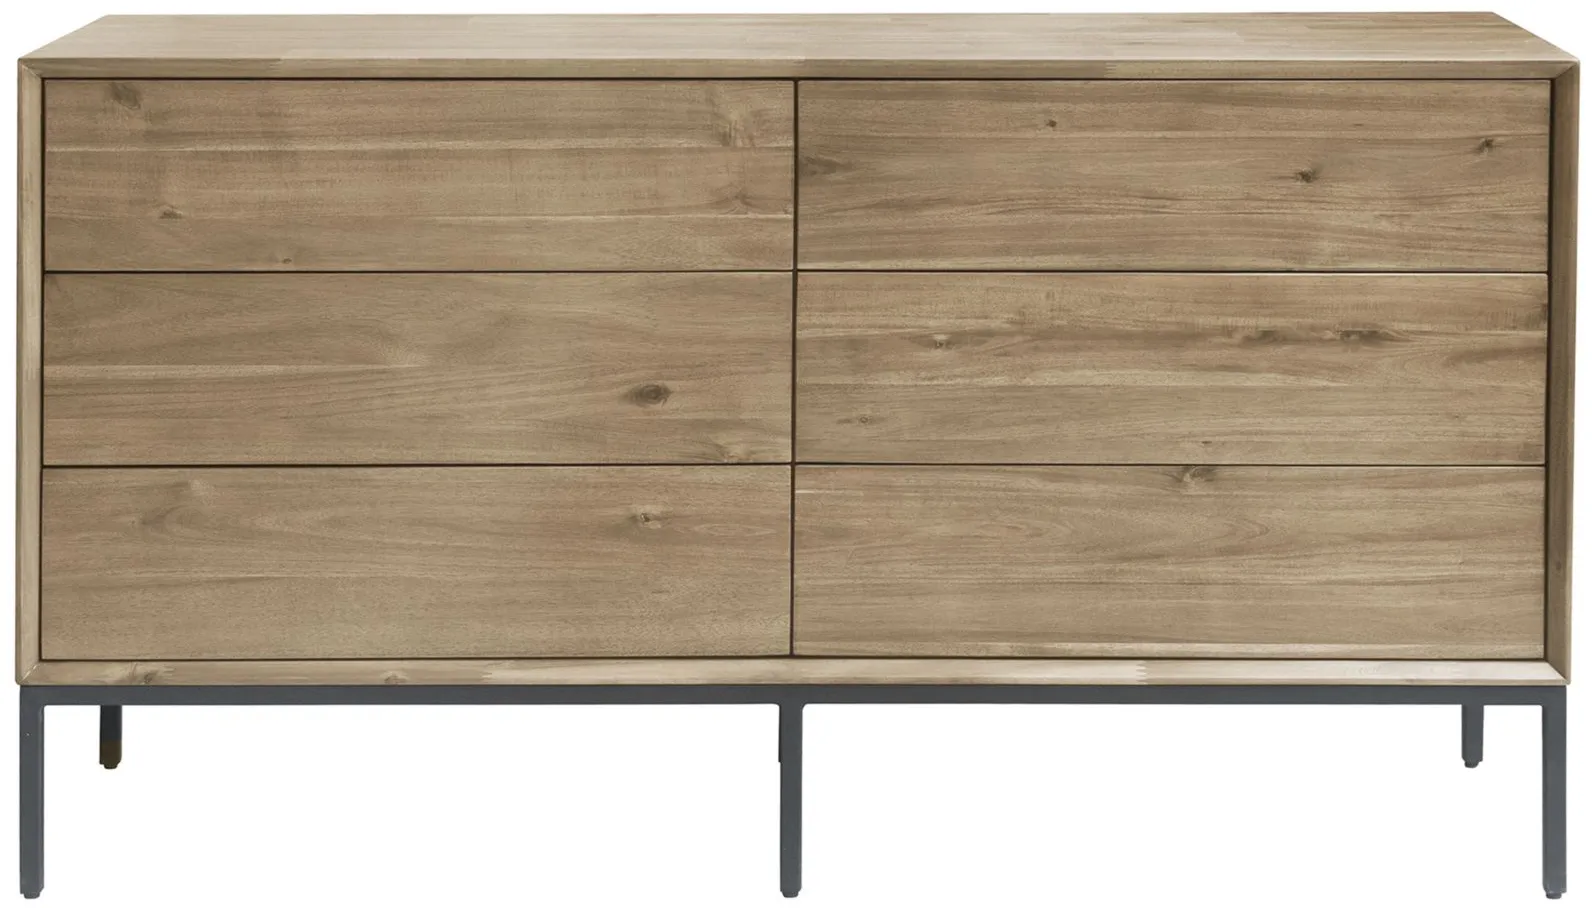 Hathaway 6 Drawer Dresser in Drifted Sand by New Pacific Direct